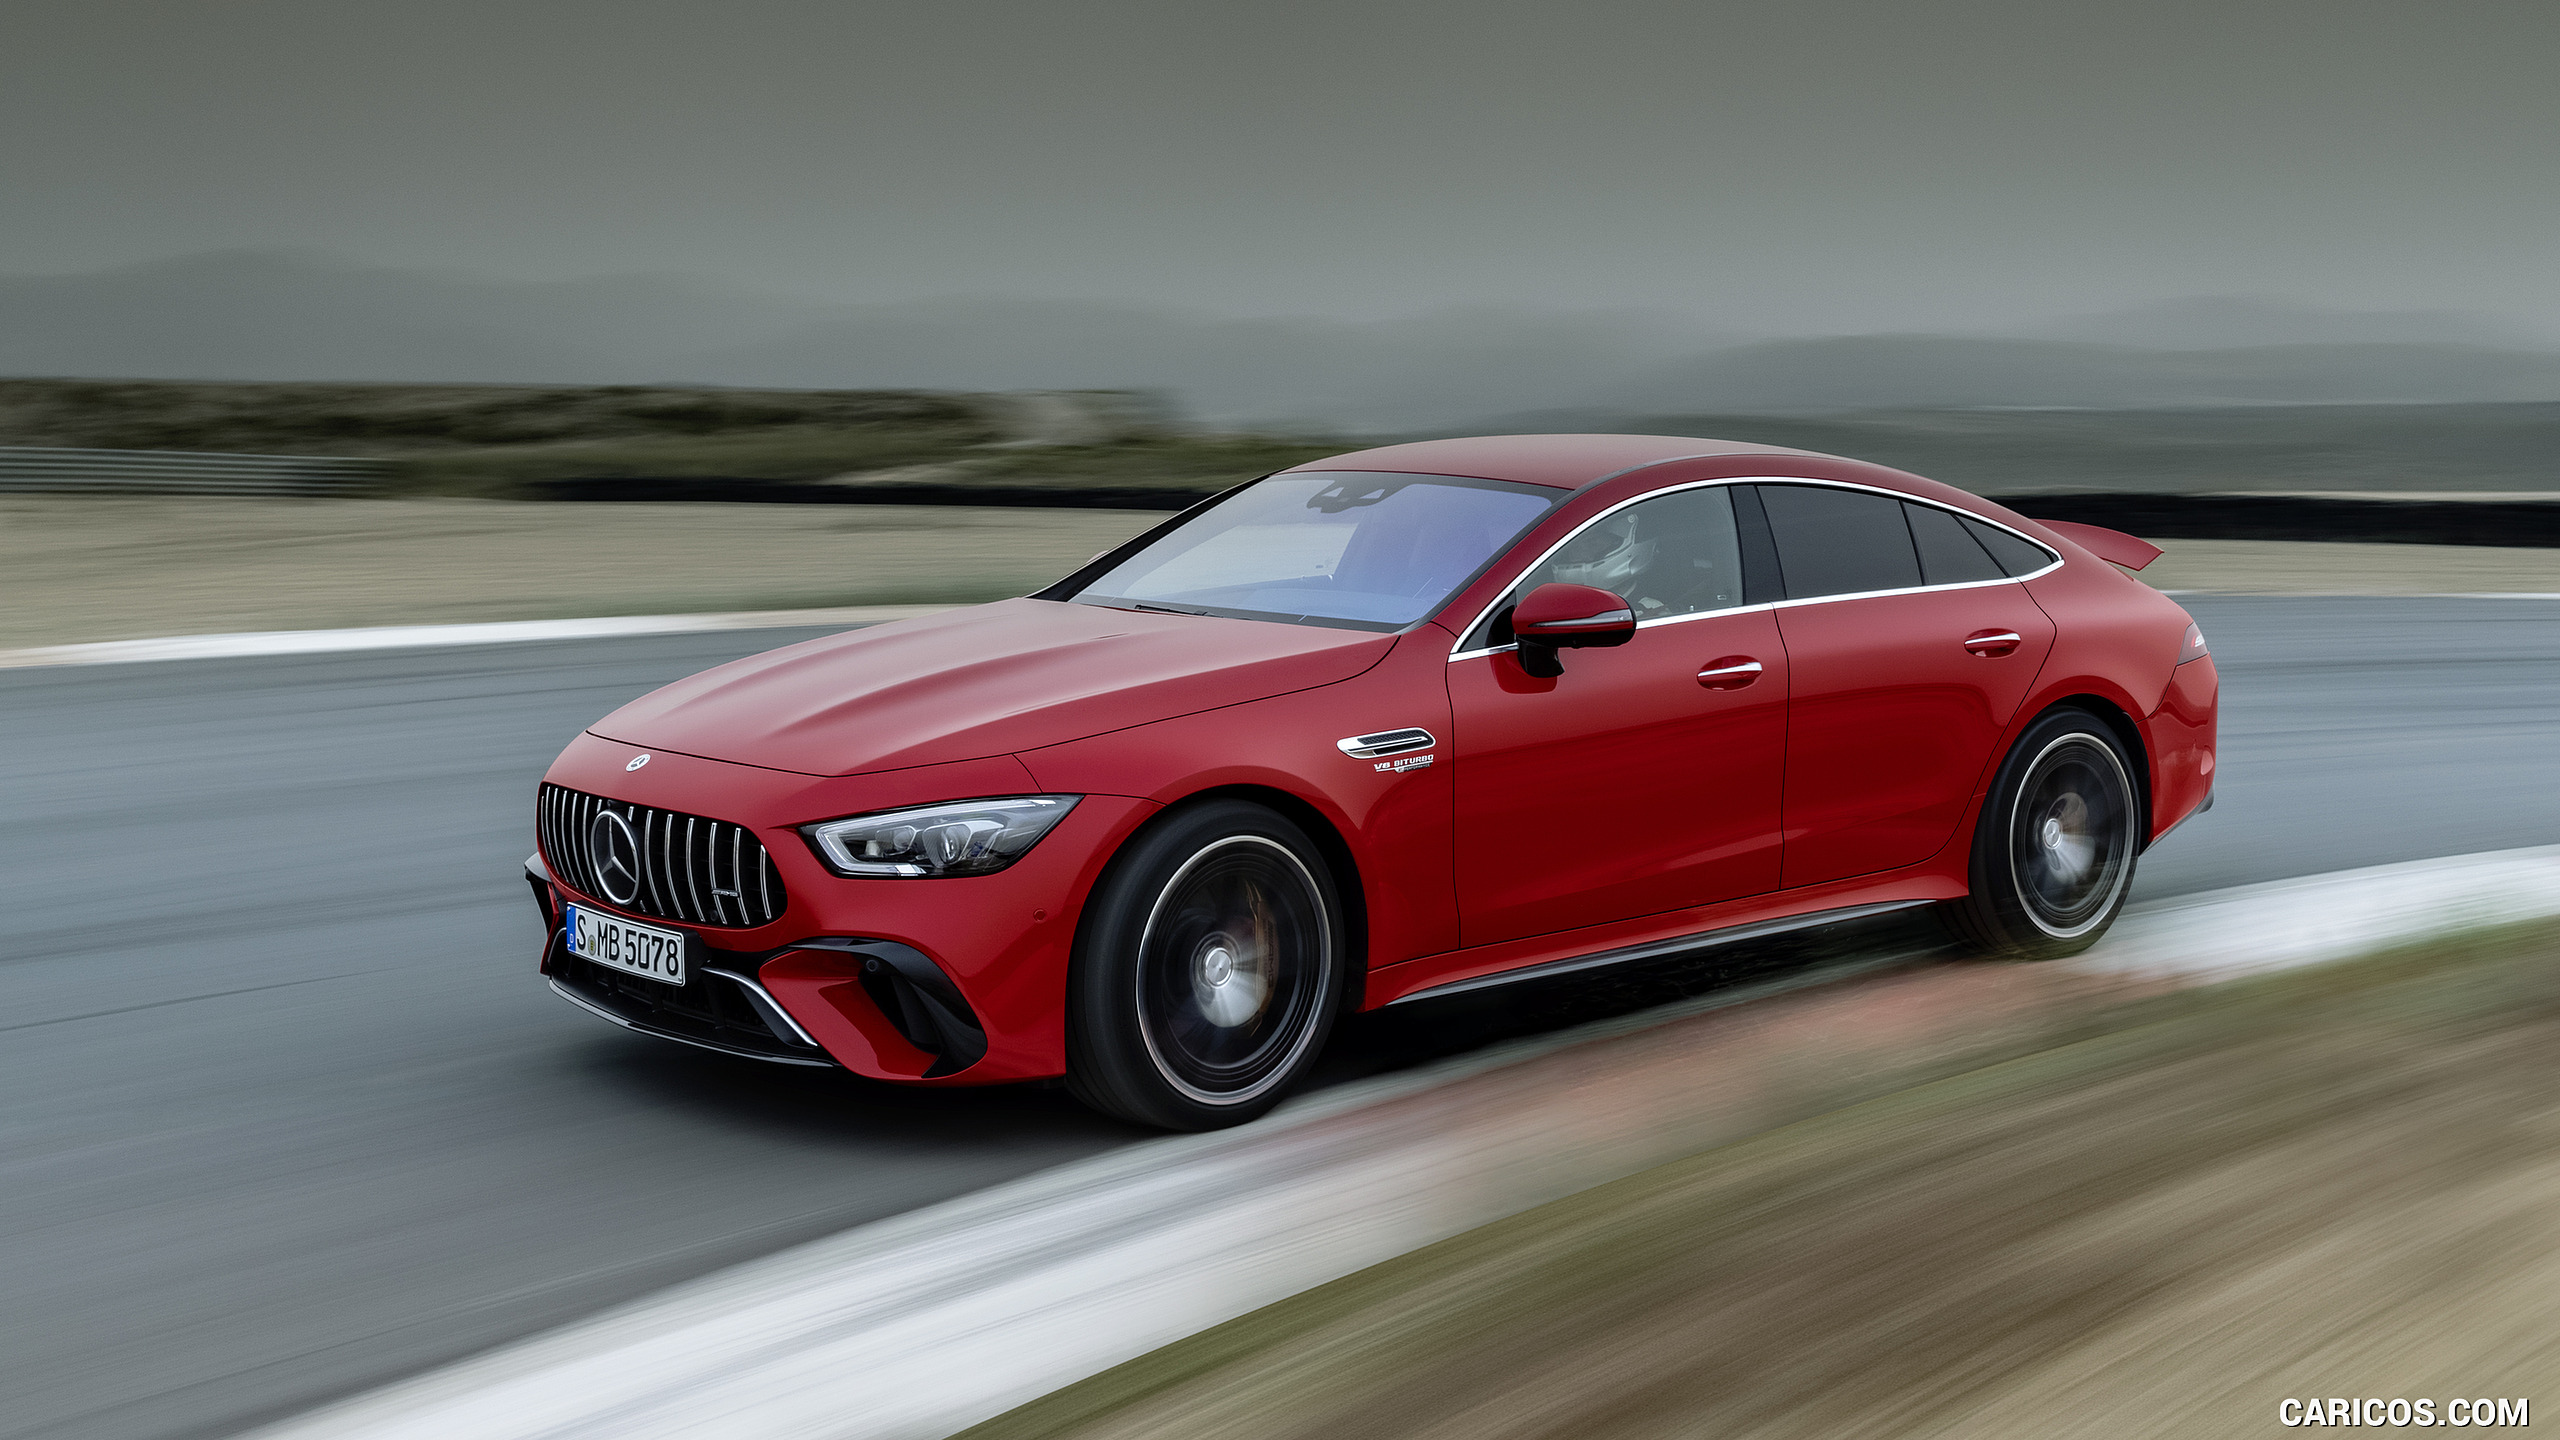 2022 Mercedes-AMG GT 63 S E Performance 4MATIC+ (Color: Jupiter Red) - Front Three-Quarter, #14 of 88